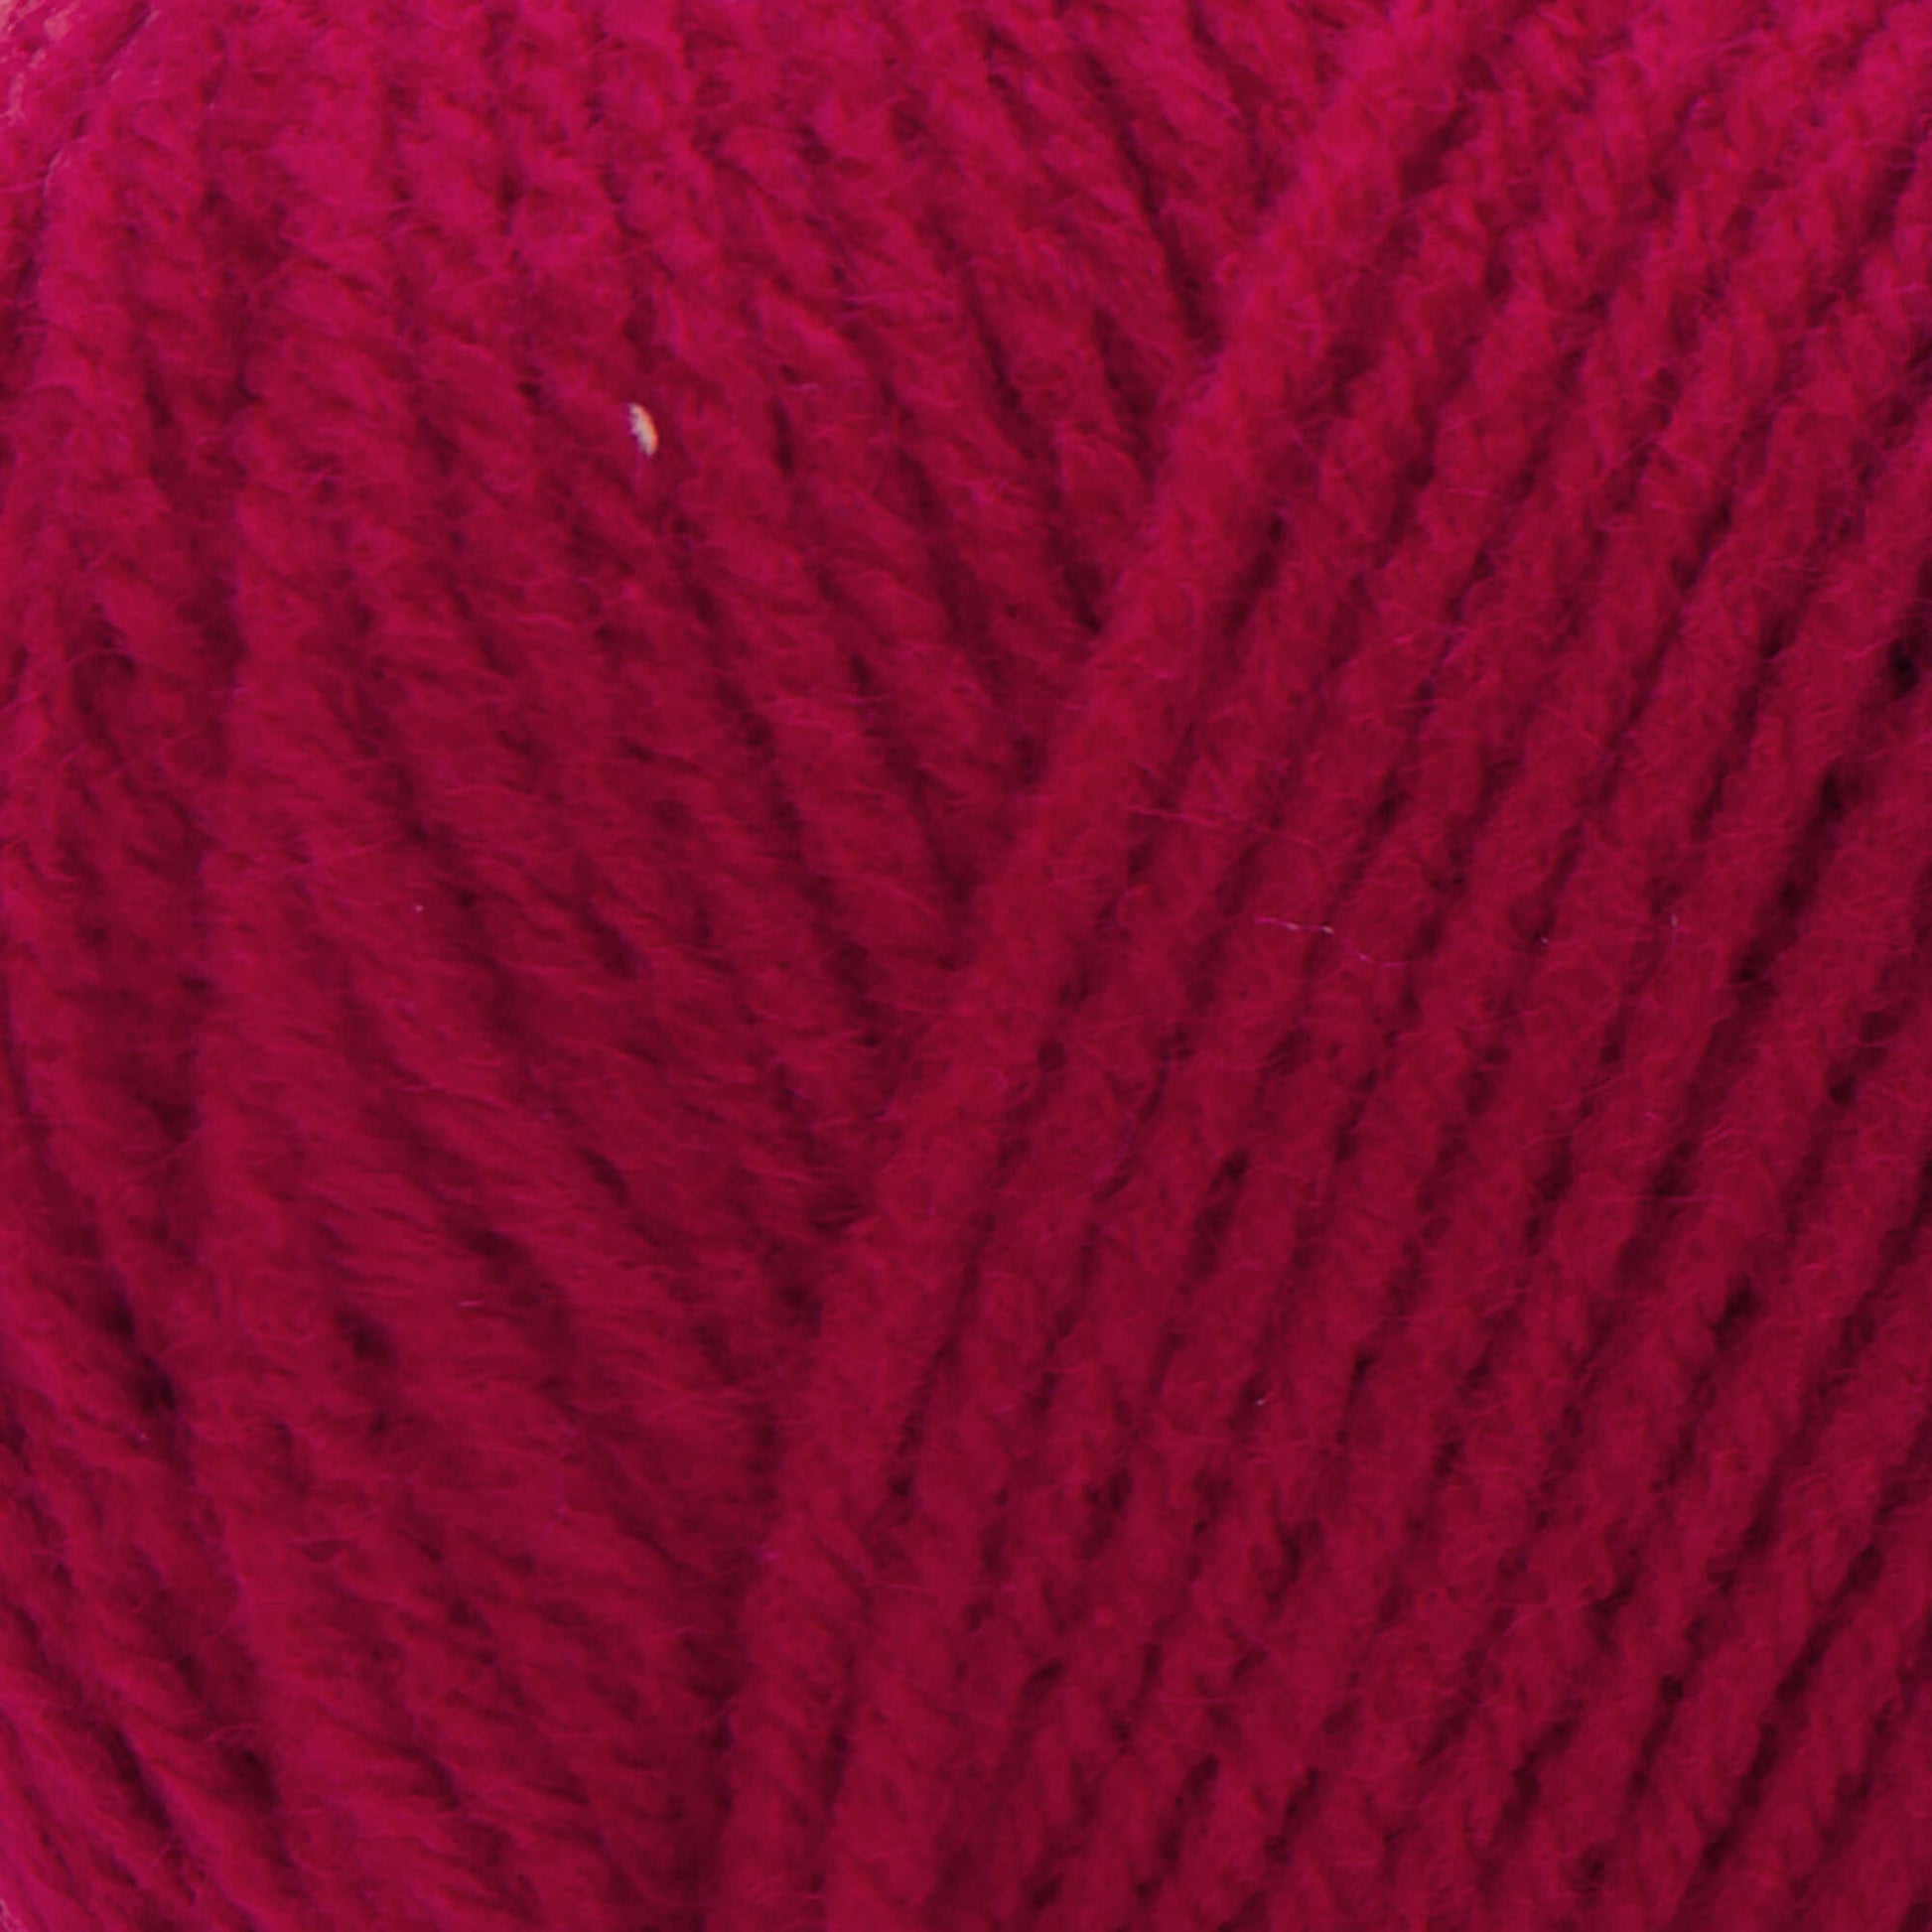 Red Heart Classic Yarn - Clearance shades Cherry Red